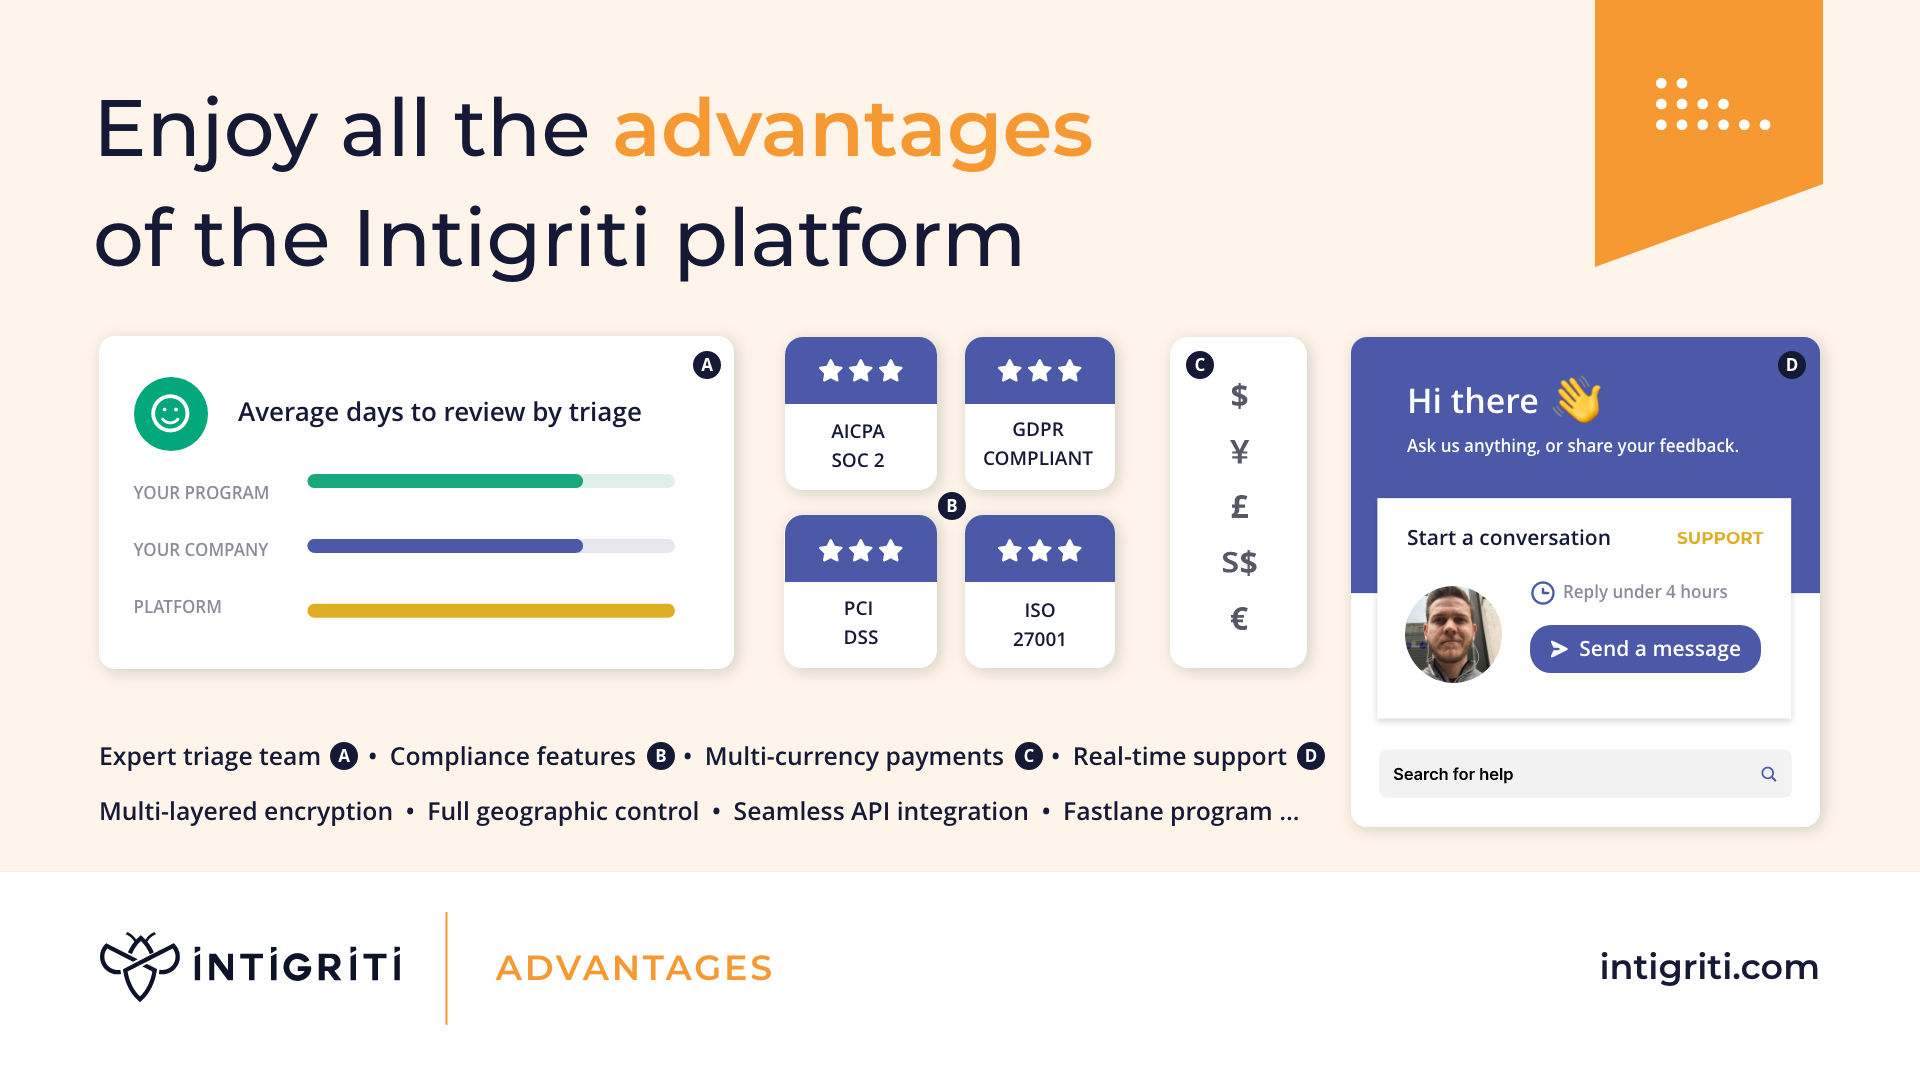 Intigriti’s bug bounty and vulnerability disclosure platform includes a wealth of customer features, from access to our expert triage team and 24/7 support to multi-currency payments and seamless API integrations.